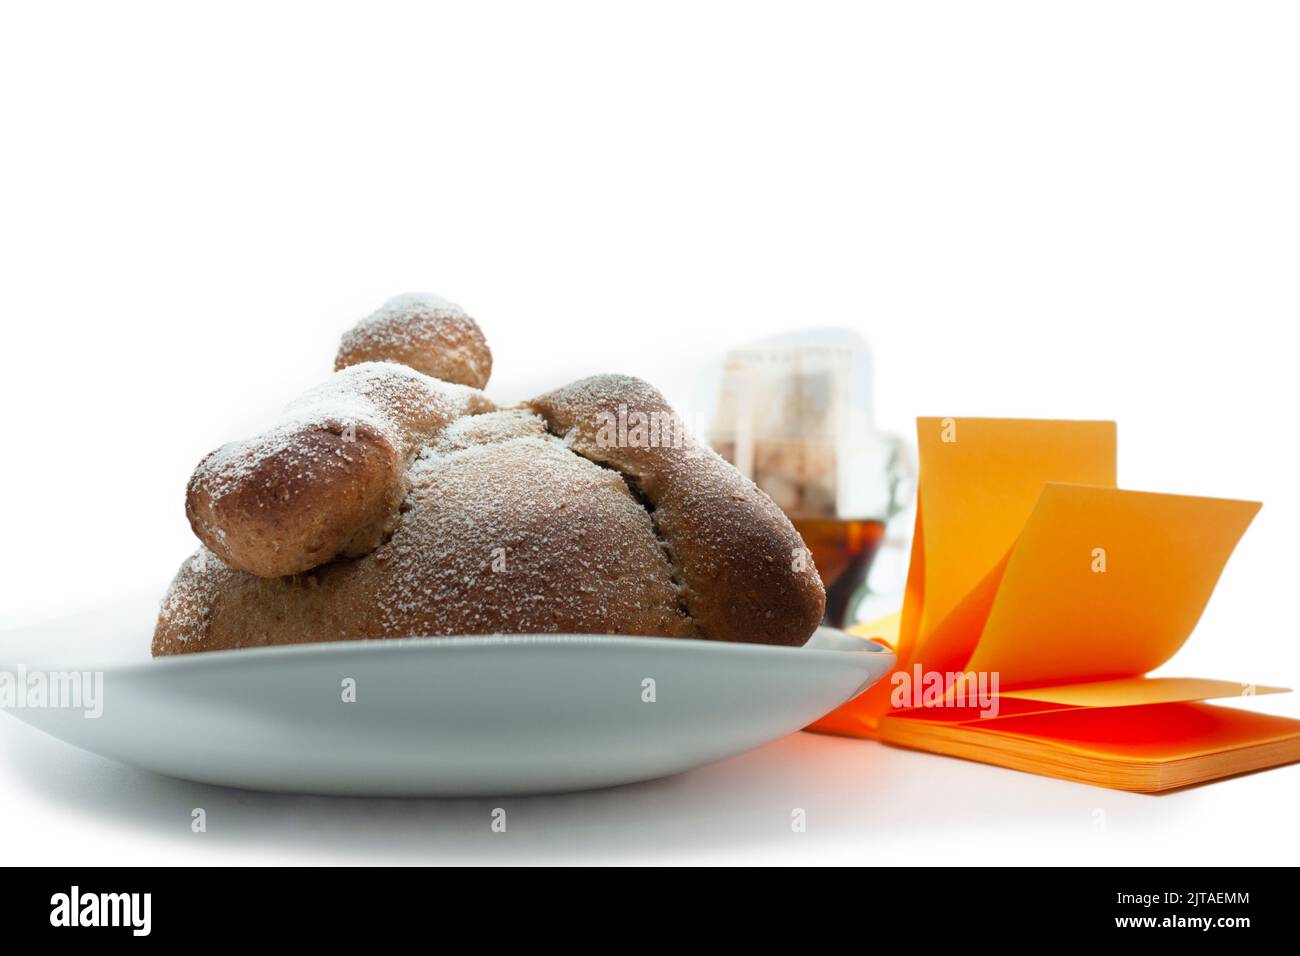 traditional bread for special food to deceased  decorated with simulated bones and sugar next to a coffee and orange paper accompanies the folklore of Stock Photo